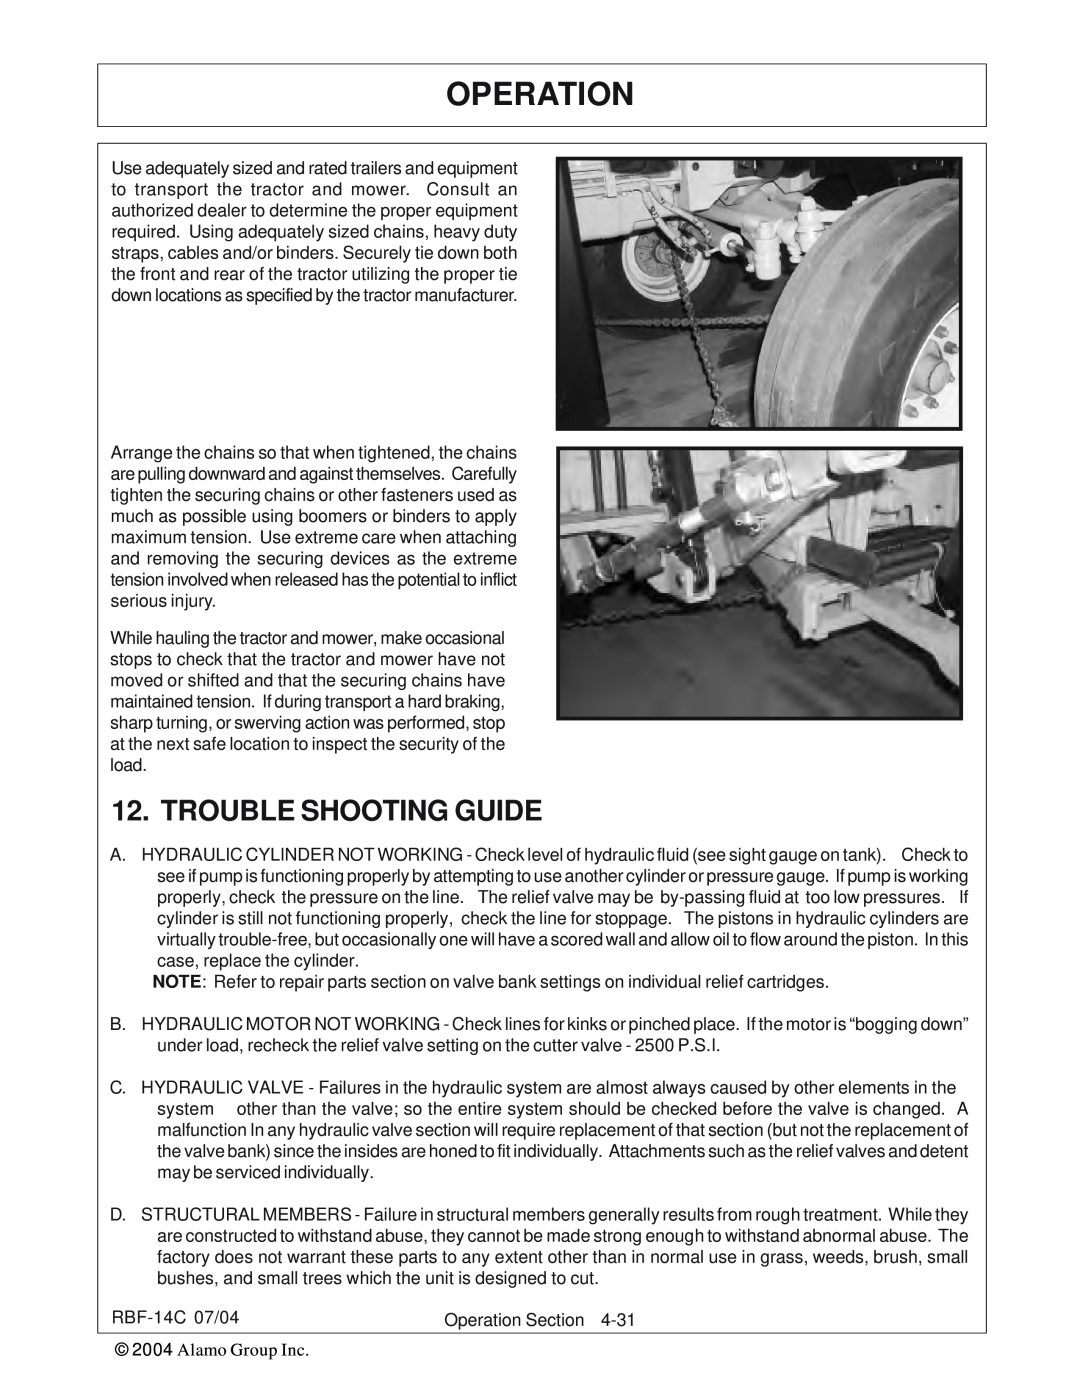 Tiger RBF-14C manual Trouble Shooting Guide, Operation 